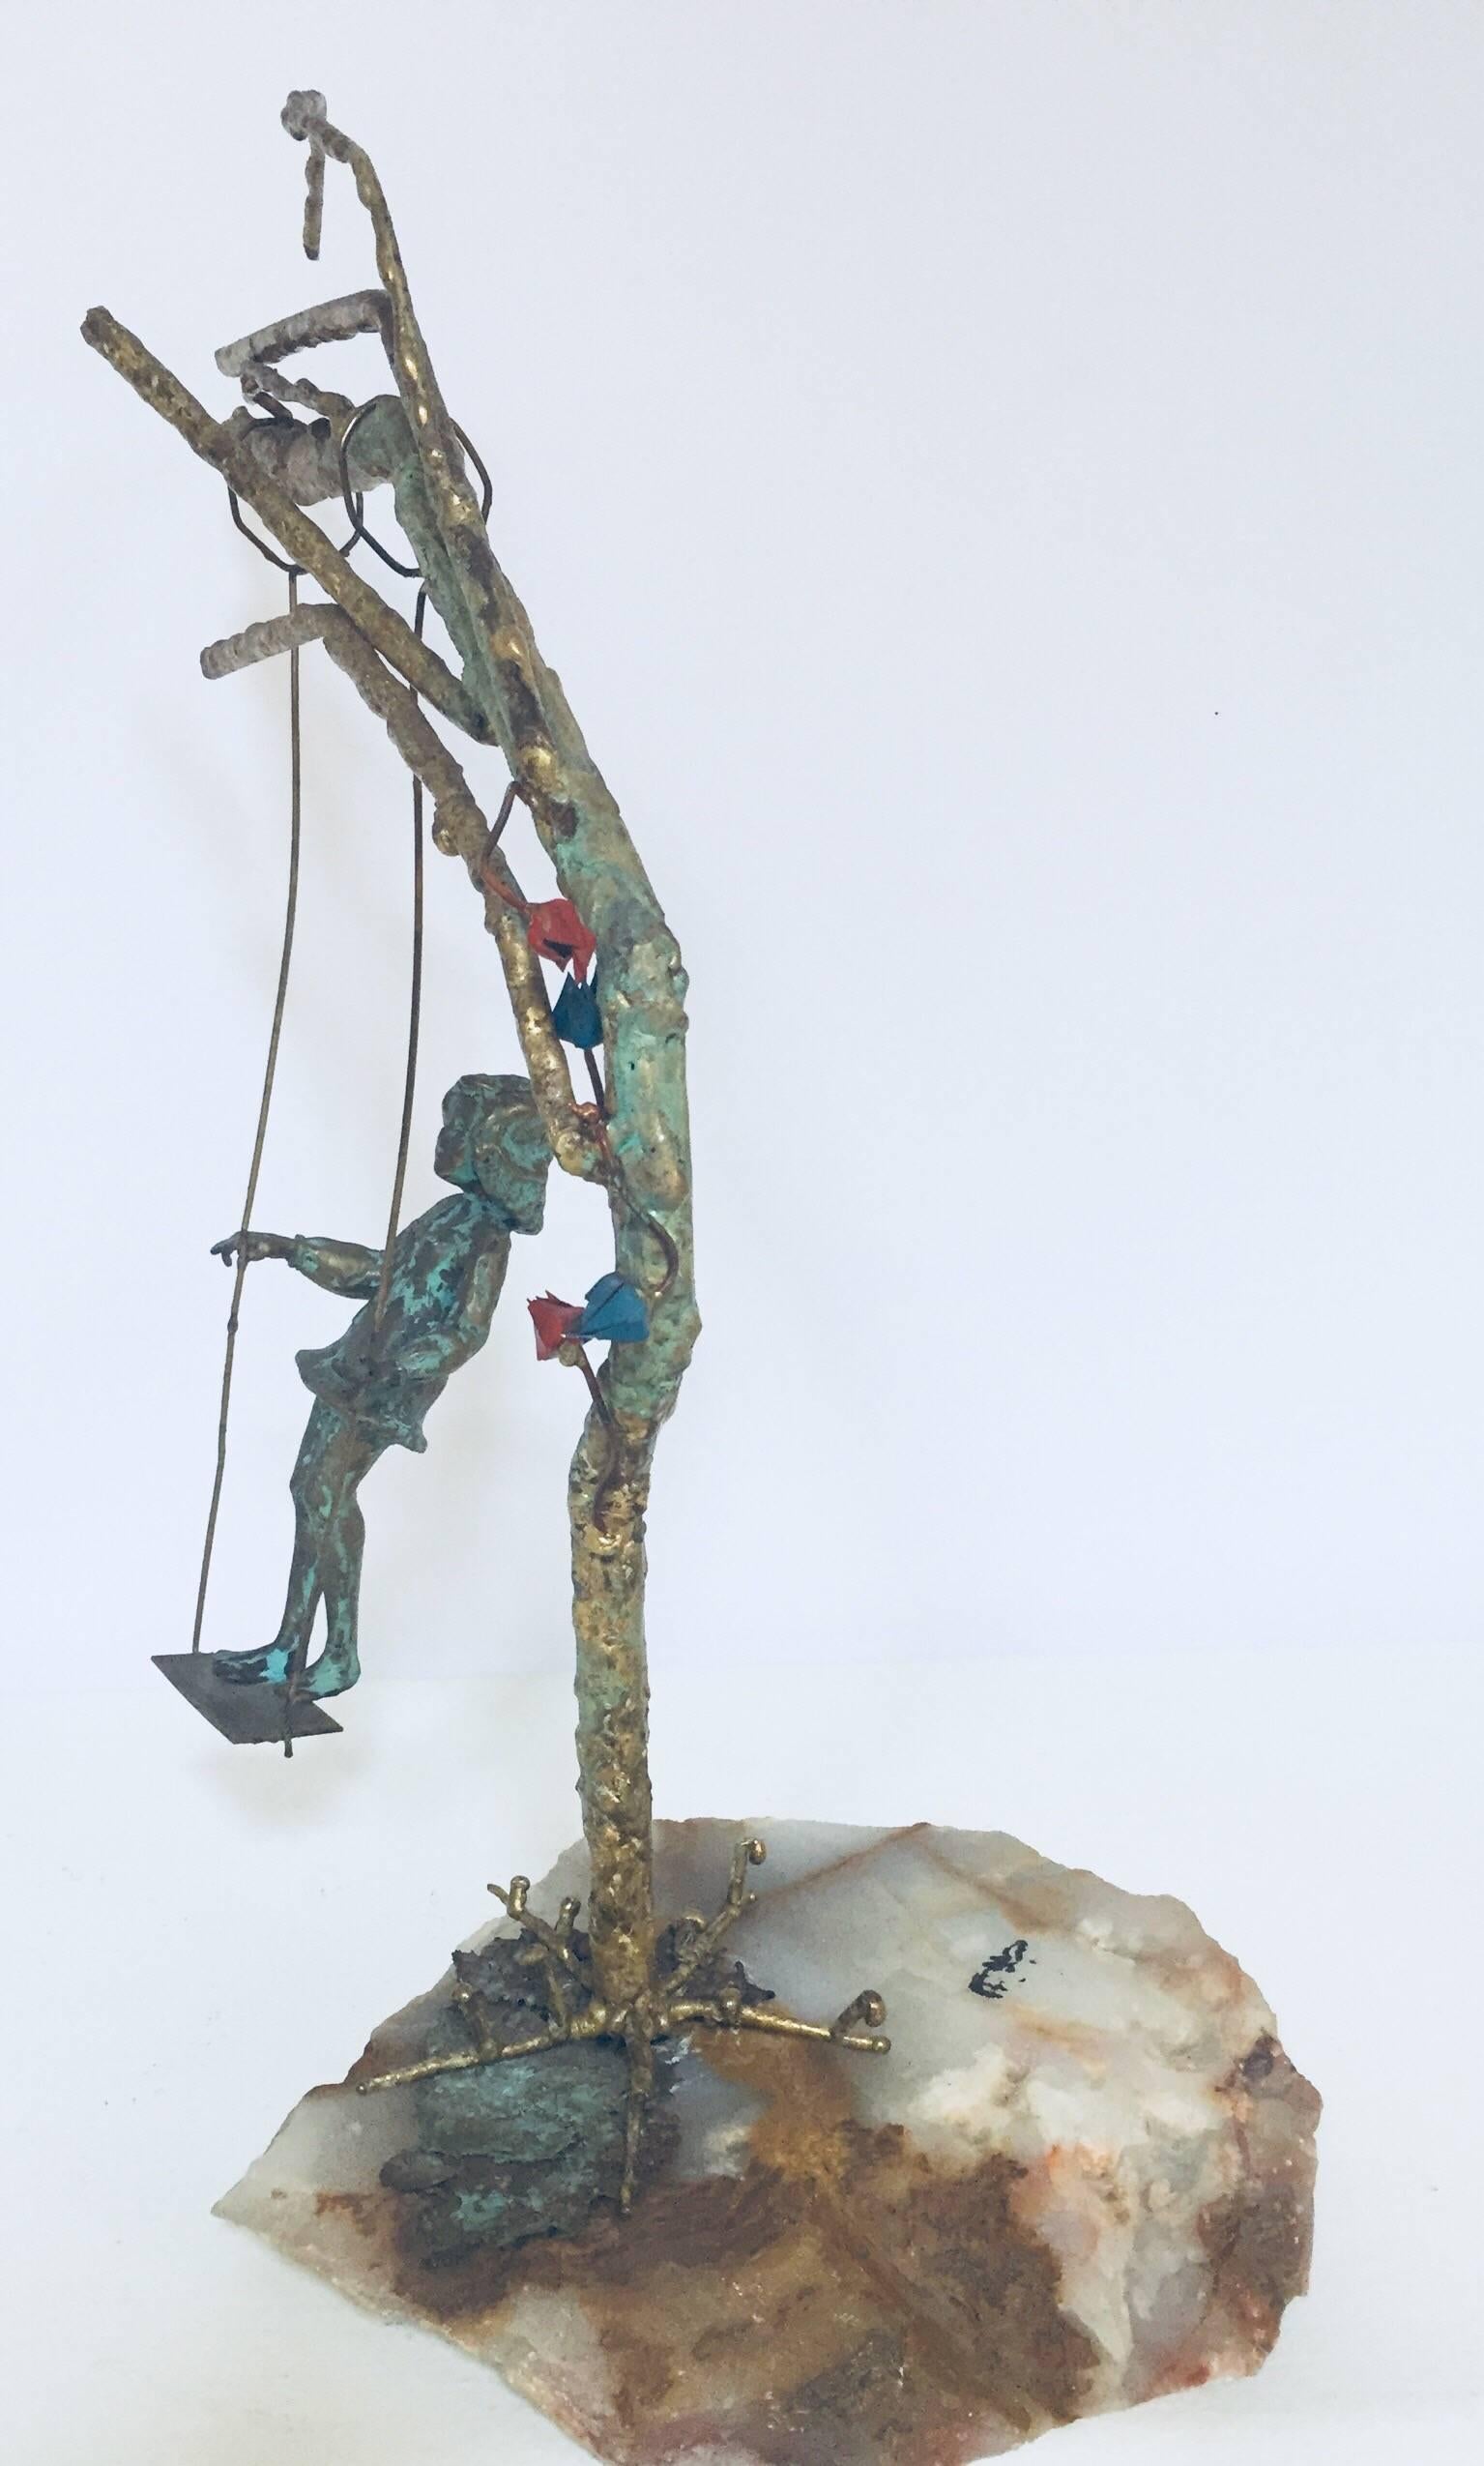 One of a kind Metal Art tree sculpture 1971 sculpture by Malcolm Moran.
It depicts a bronze girl on a swing hanging from a tree branch that sits upon a geode base.
The sculpture is signed 